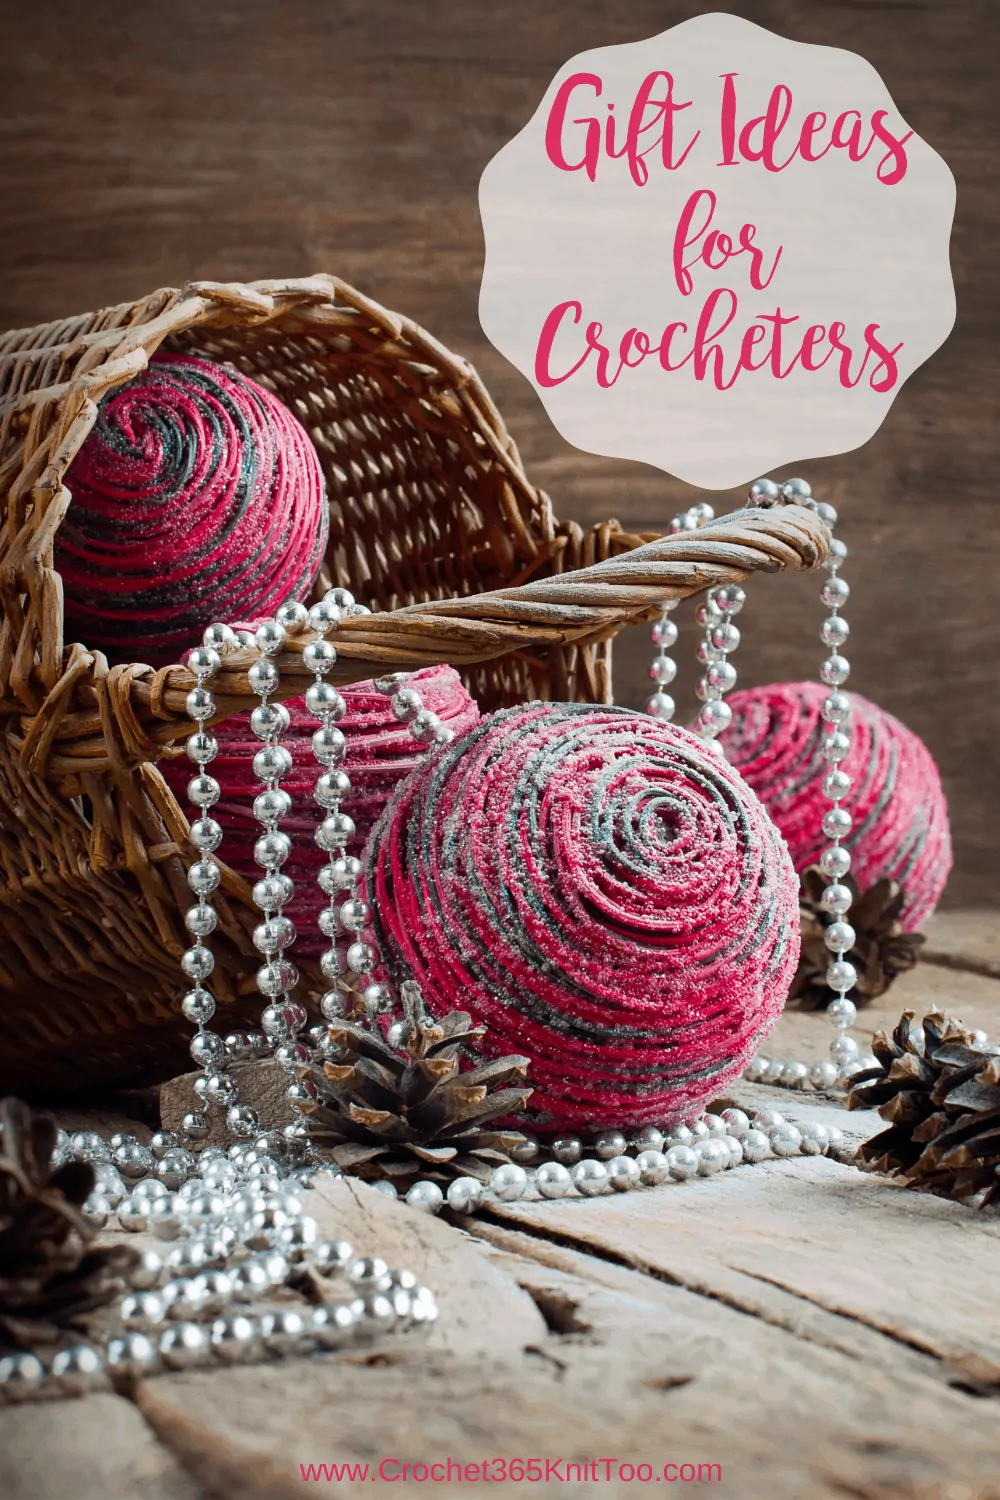 10 unique gift ideas for crocheters - absolute must-haves in 2019!